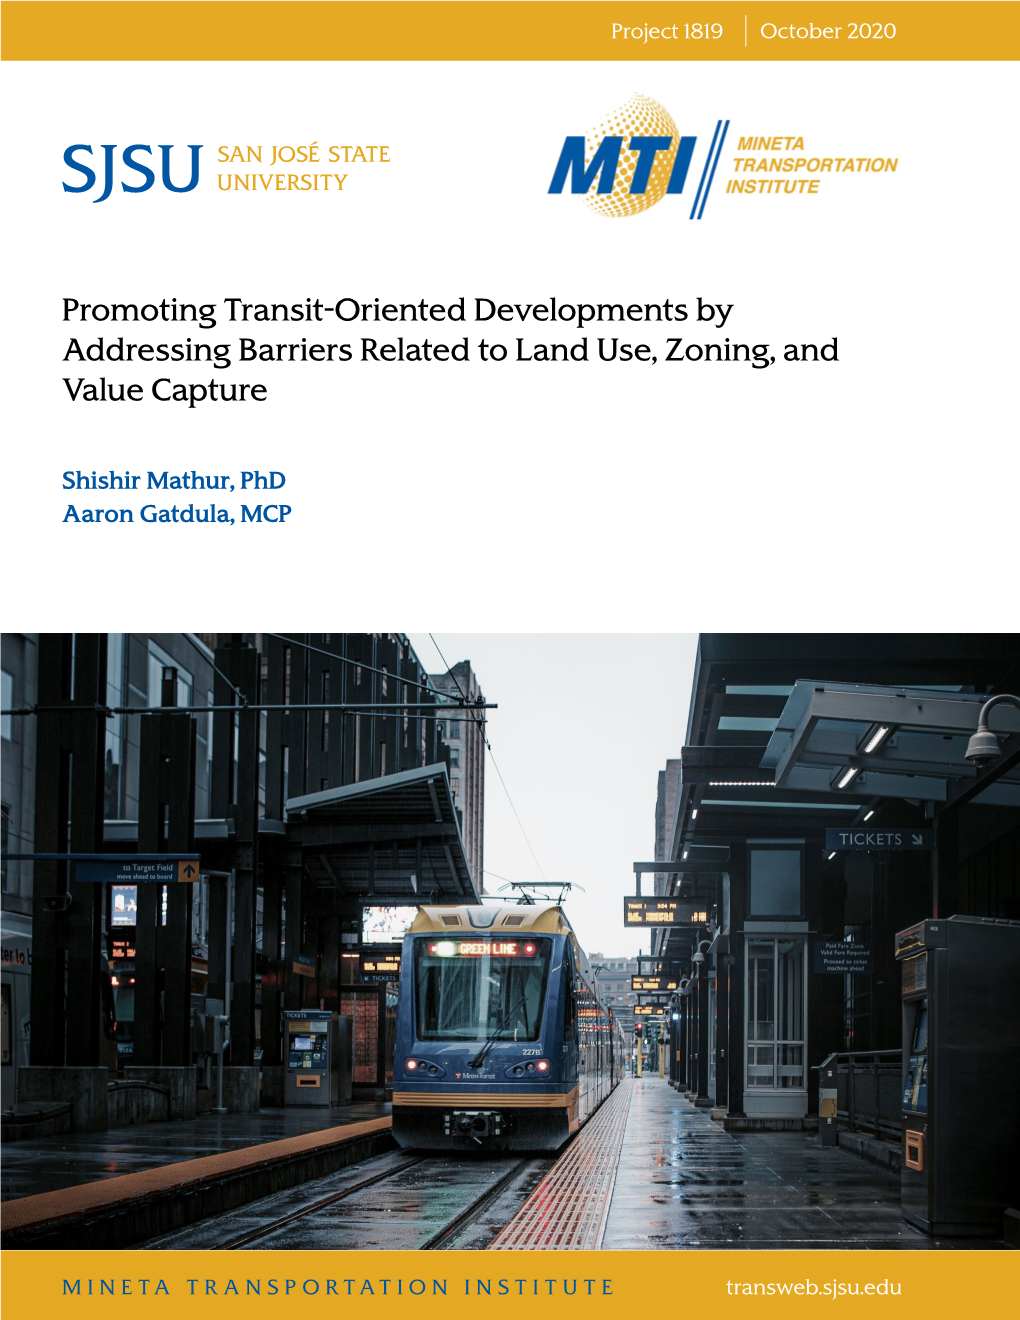 Promoting Transit-Oriented Developments by Addressing Barriers Related to Land Use, Zoning, and Value Capture